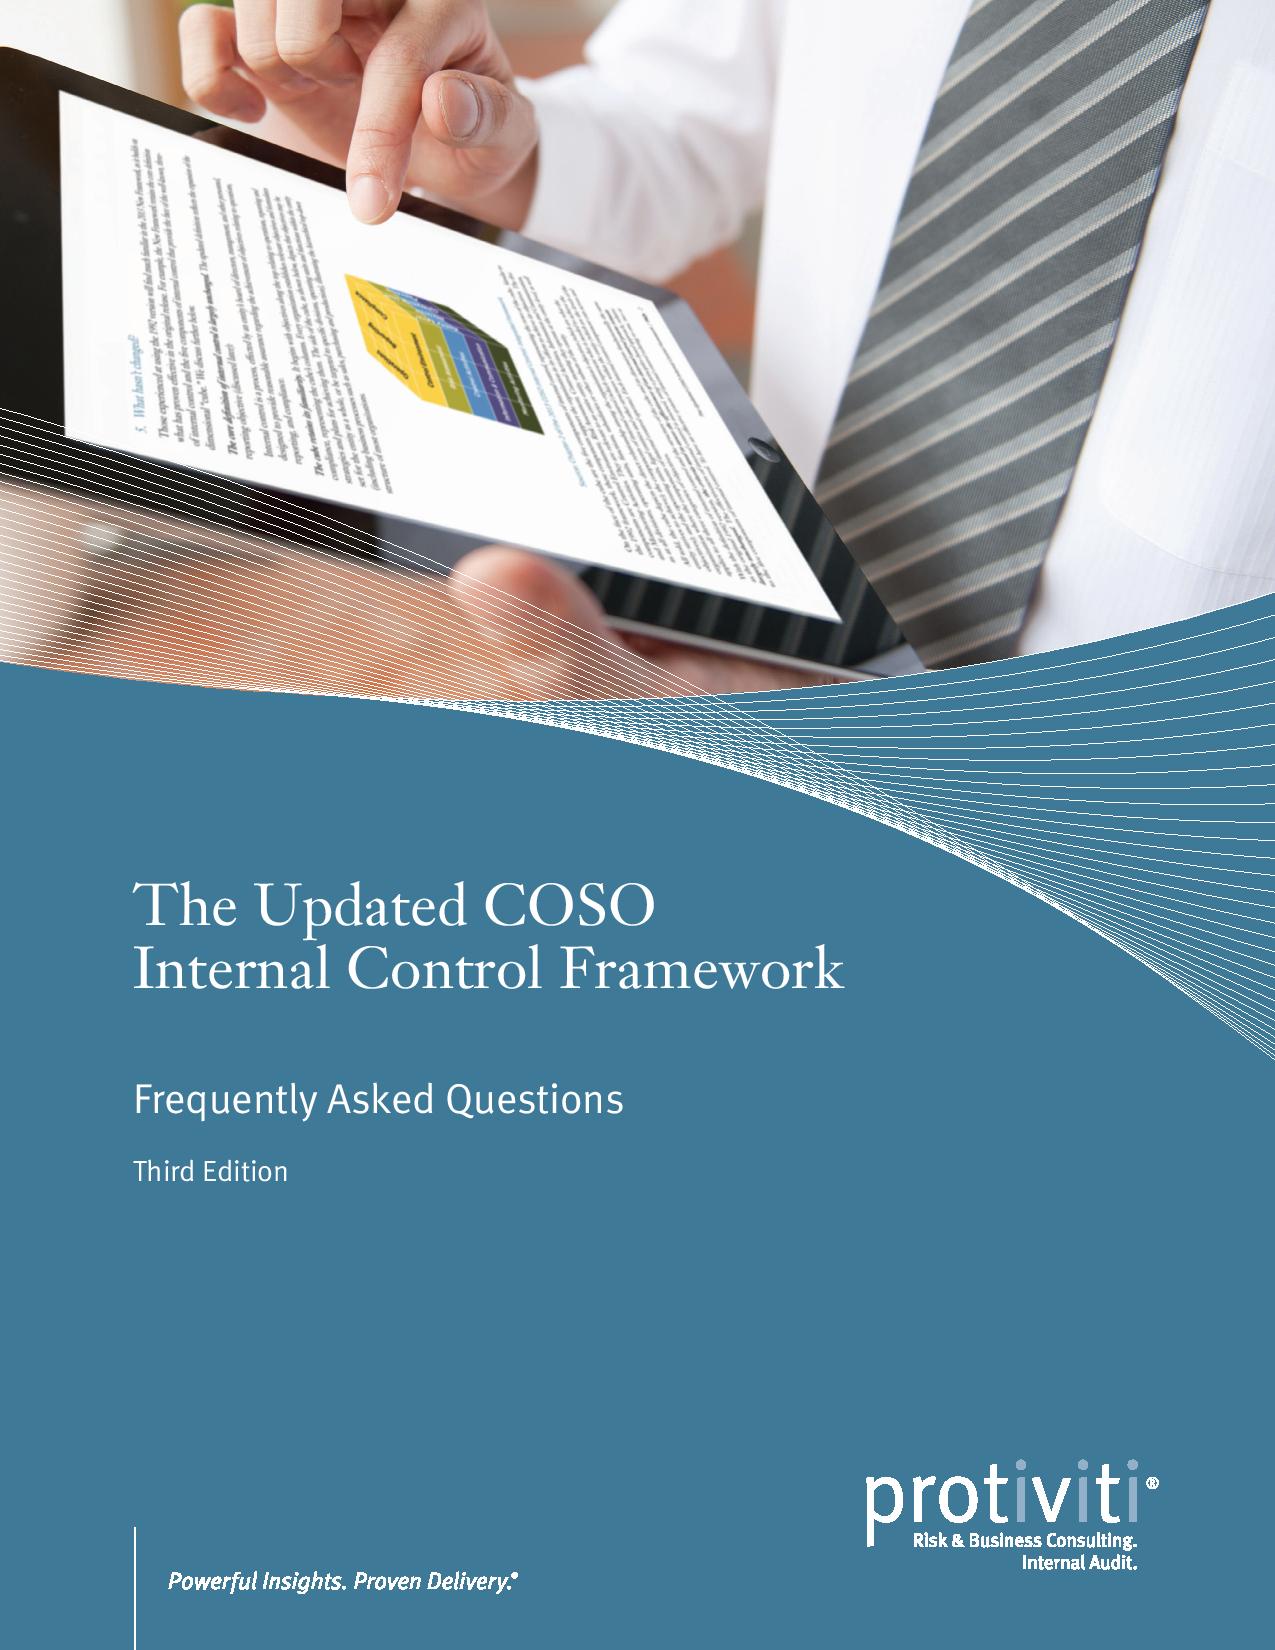 The Updated COSO Internal Control Framework